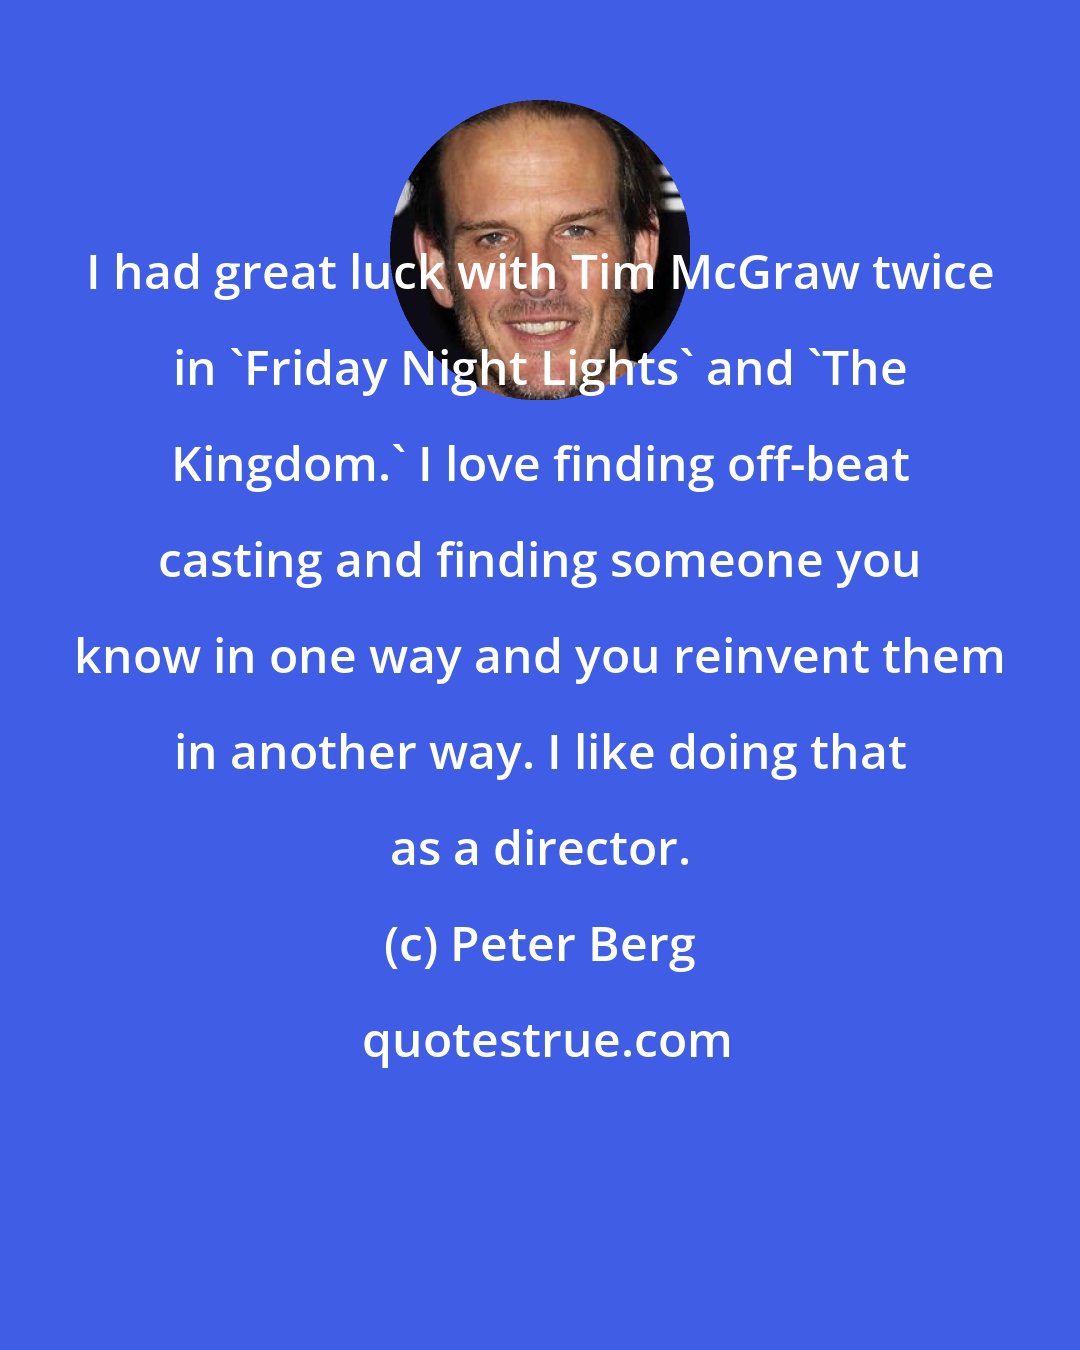 Peter Berg: I had great luck with Tim McGraw twice in 'Friday Night Lights' and 'The Kingdom.' I love finding off-beat casting and finding someone you know in one way and you reinvent them in another way. I like doing that as a director.